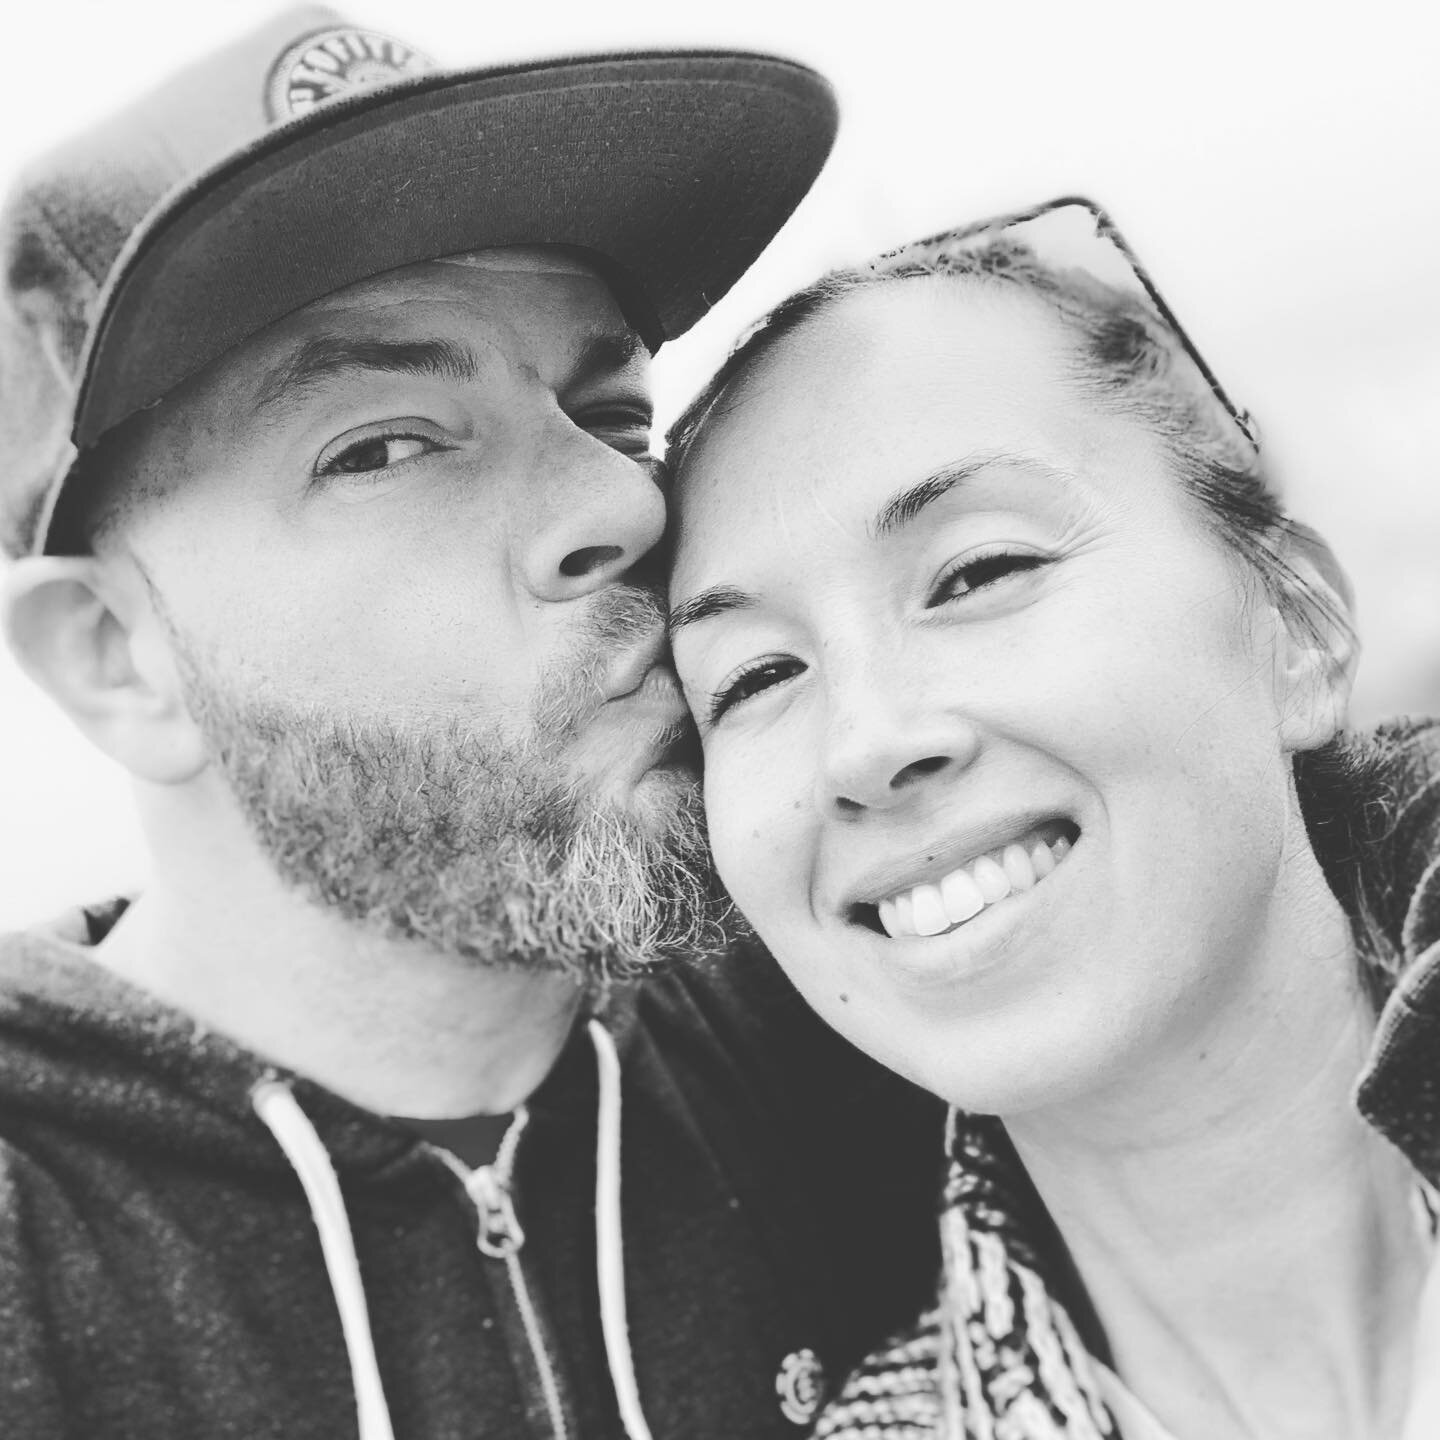 10 years married today. @kelsey.j.mckenzie Love her very much. We just arrived to live back on the island a couple days ago. We left here 12 years ago. Full circle. Lucky man:)